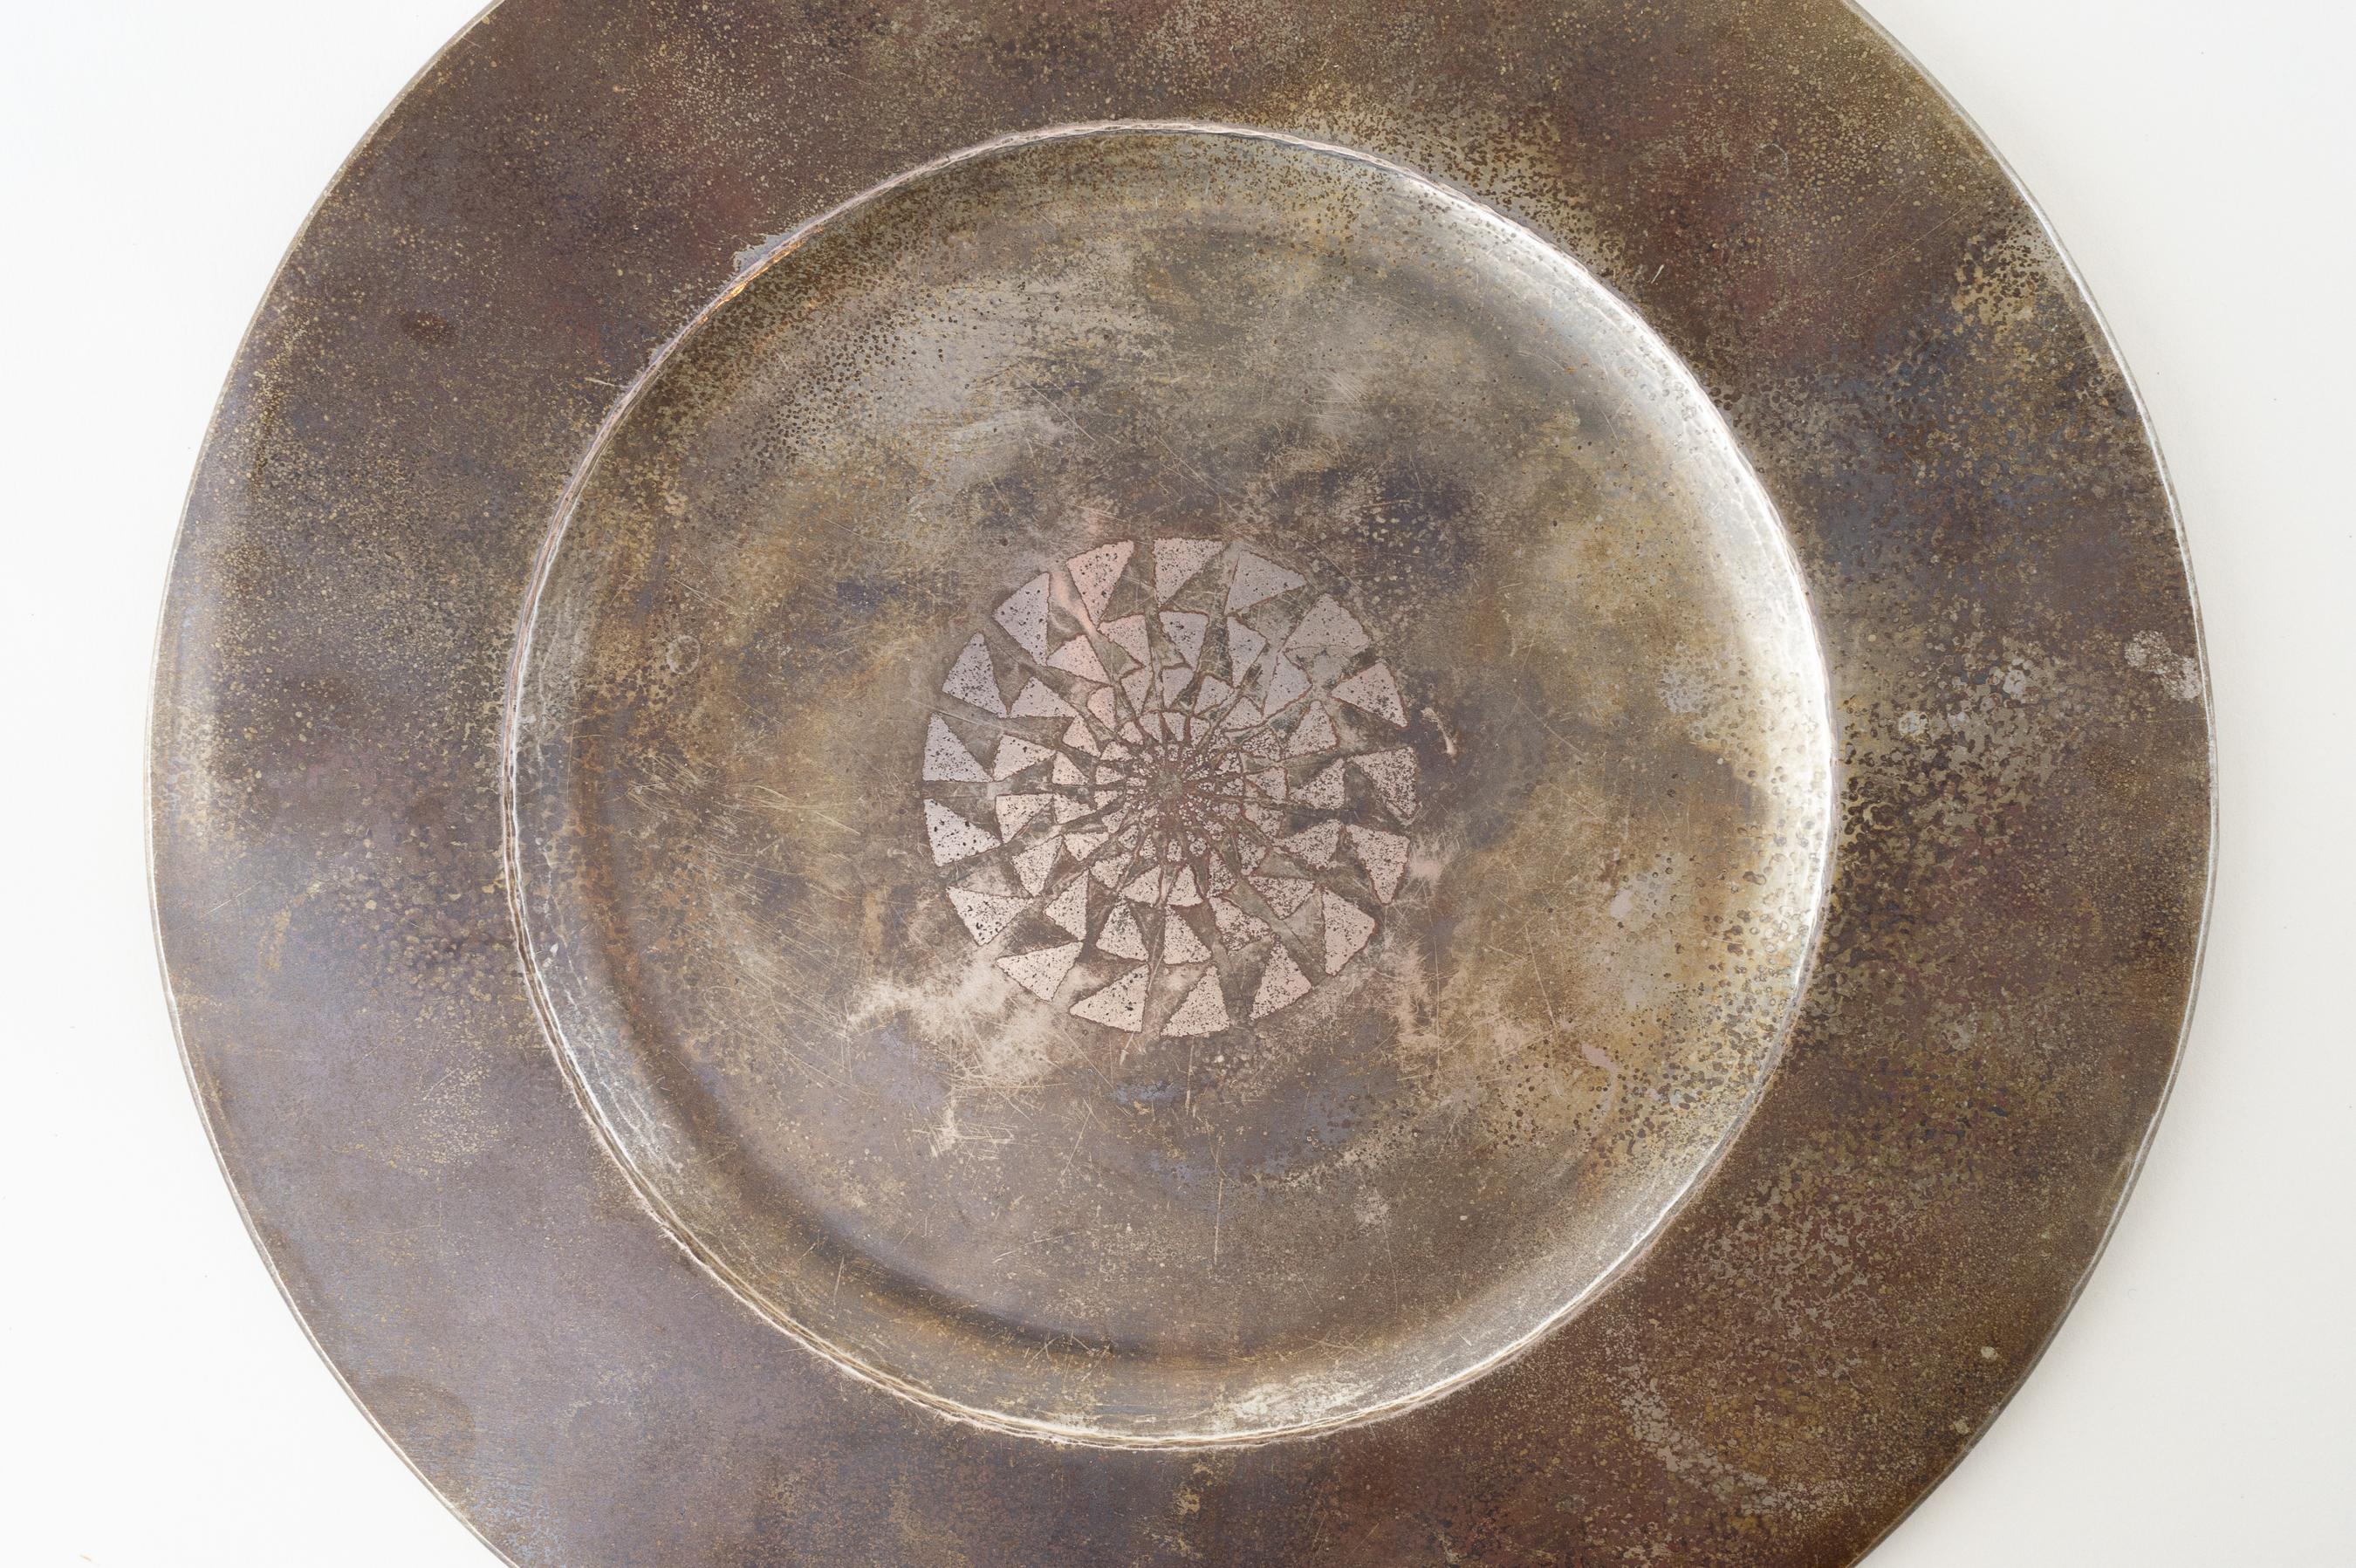 A large, circular nickeled silver platter decorated with a central geometric rosette composed of silver leaf. Strong Patina. Impressed “Y. DUCHAMPS/G. LACROIX” at underside.